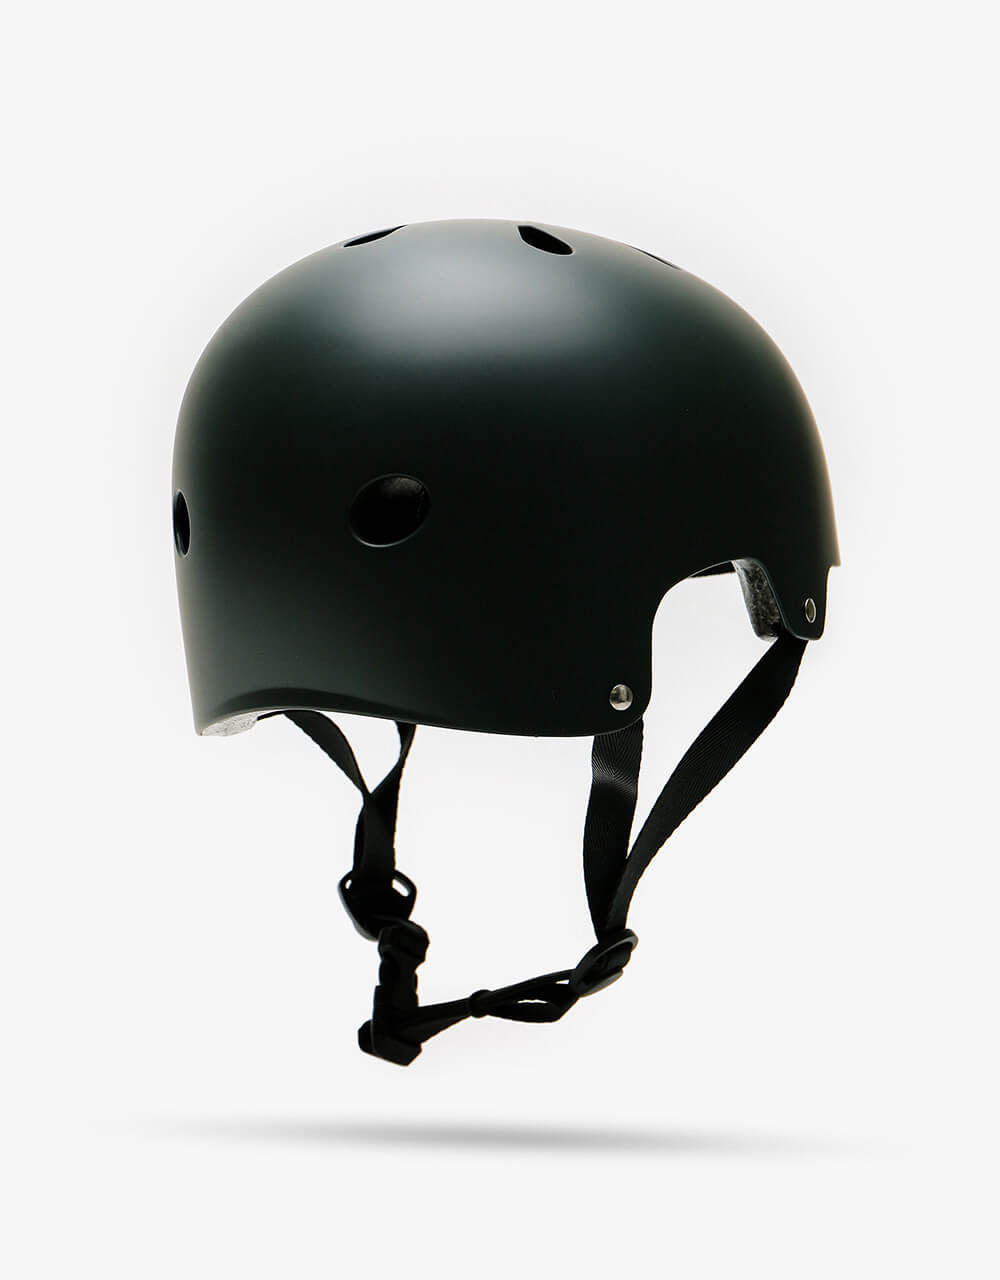 Route One Classic Helmet - Matte Charcoal